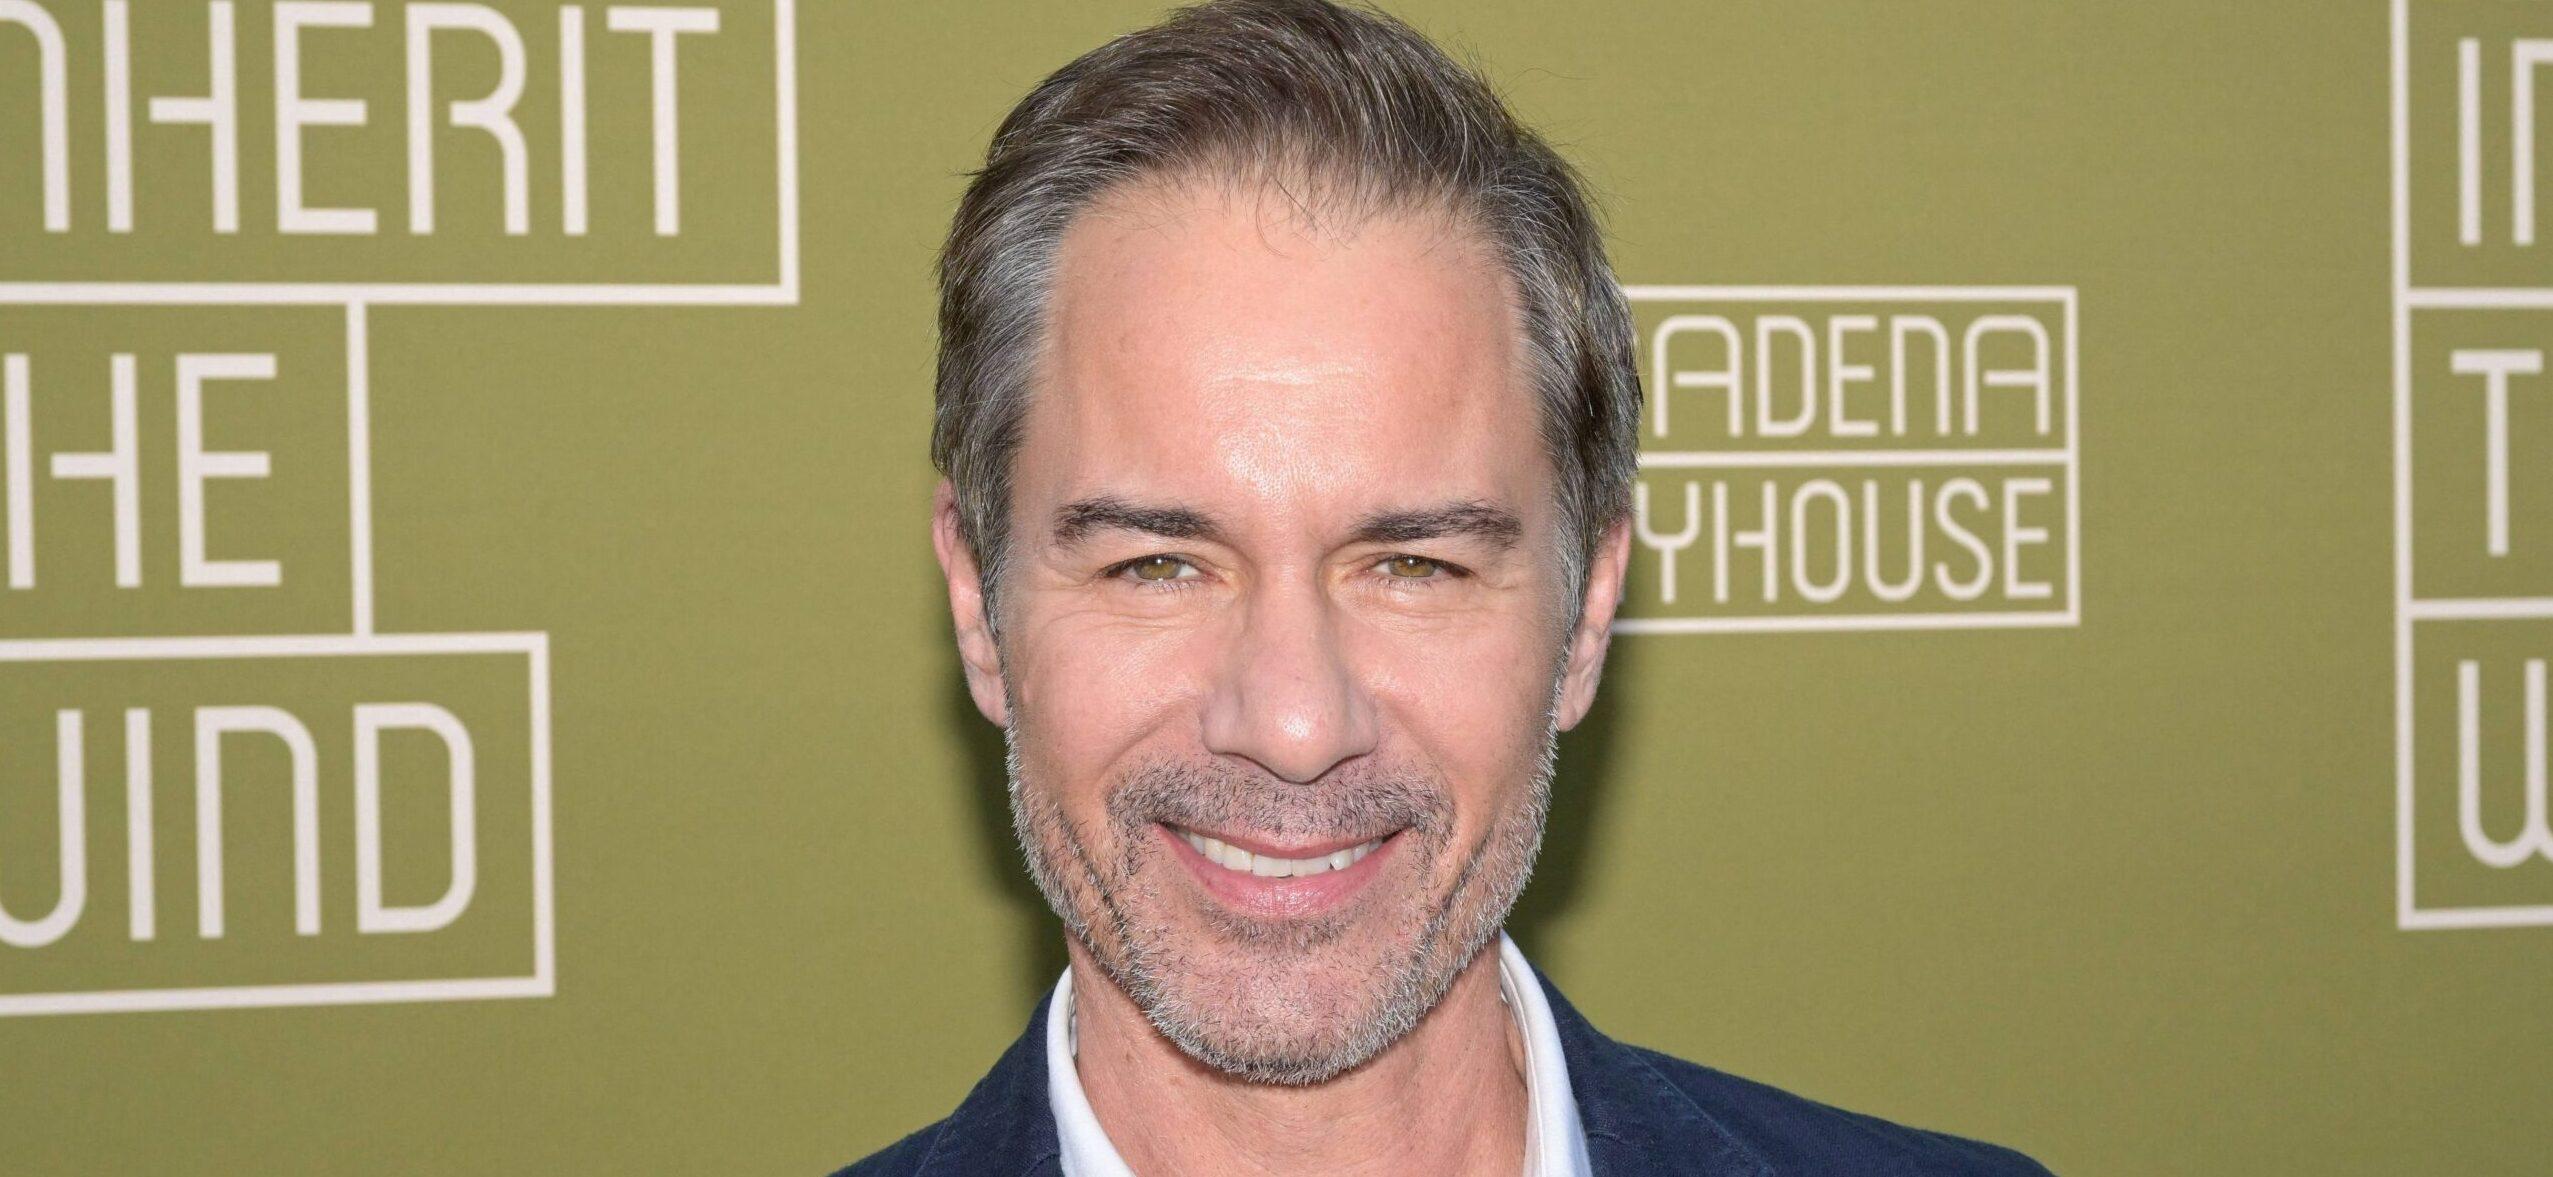 ‘Will & Grace’ Star Eric McCormack Steps Out With Wedding Ring After Wife Filed For Divorce